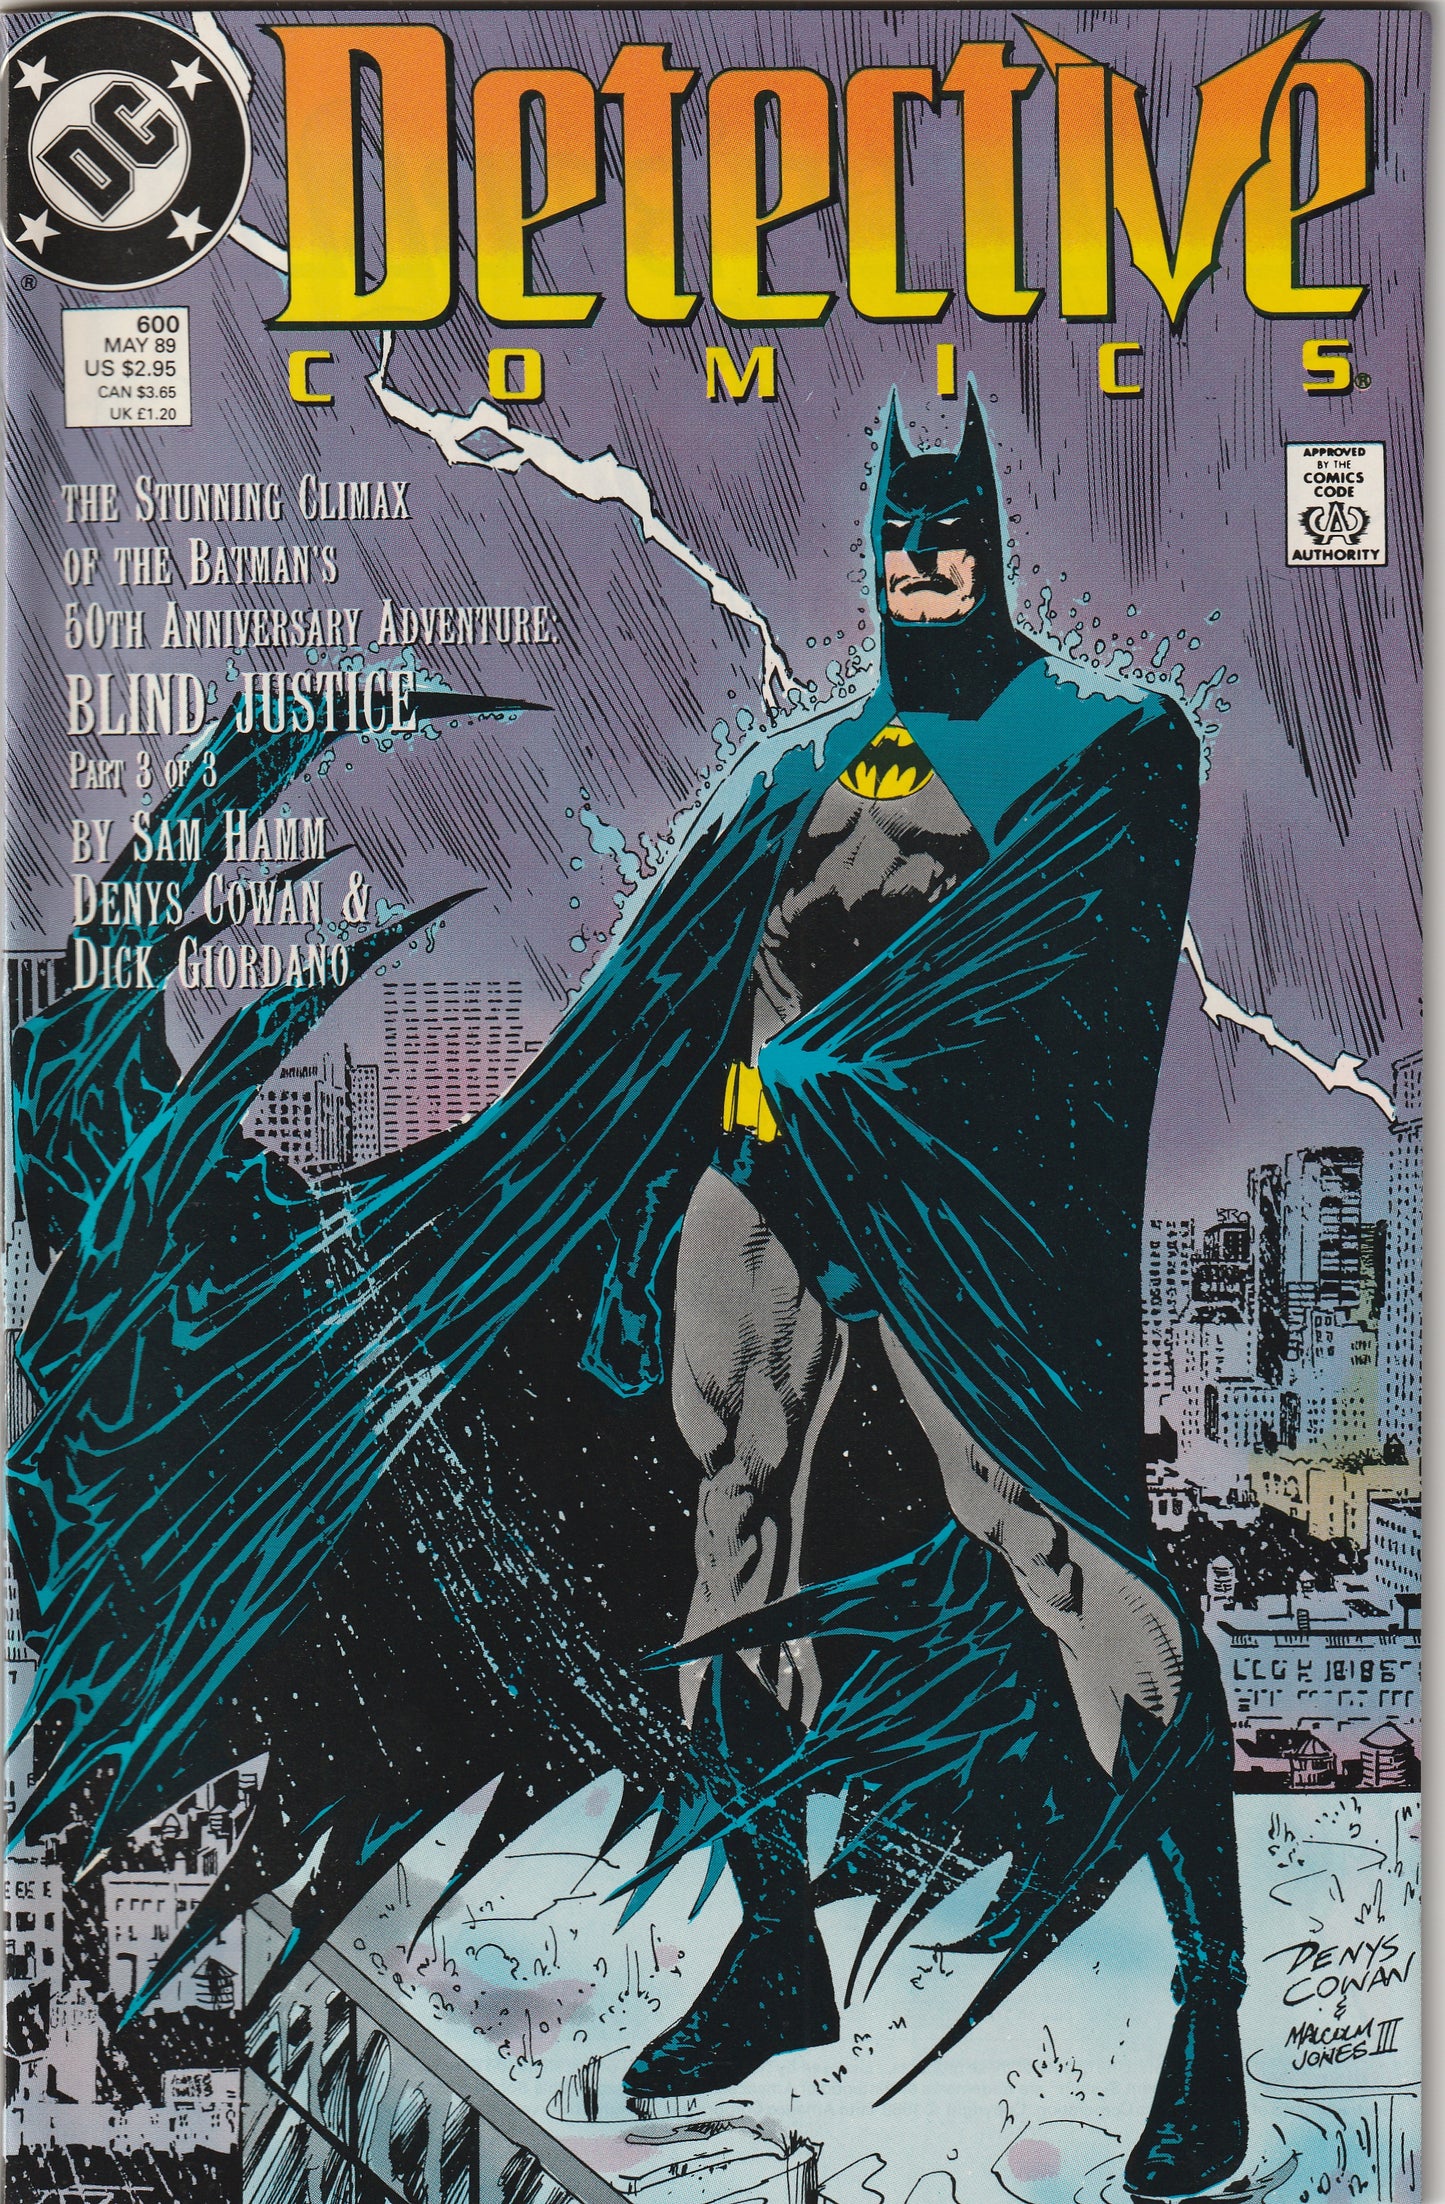 Detective Comics #600 (1989) - Blind Justice, Giant Size 50th Anniversary